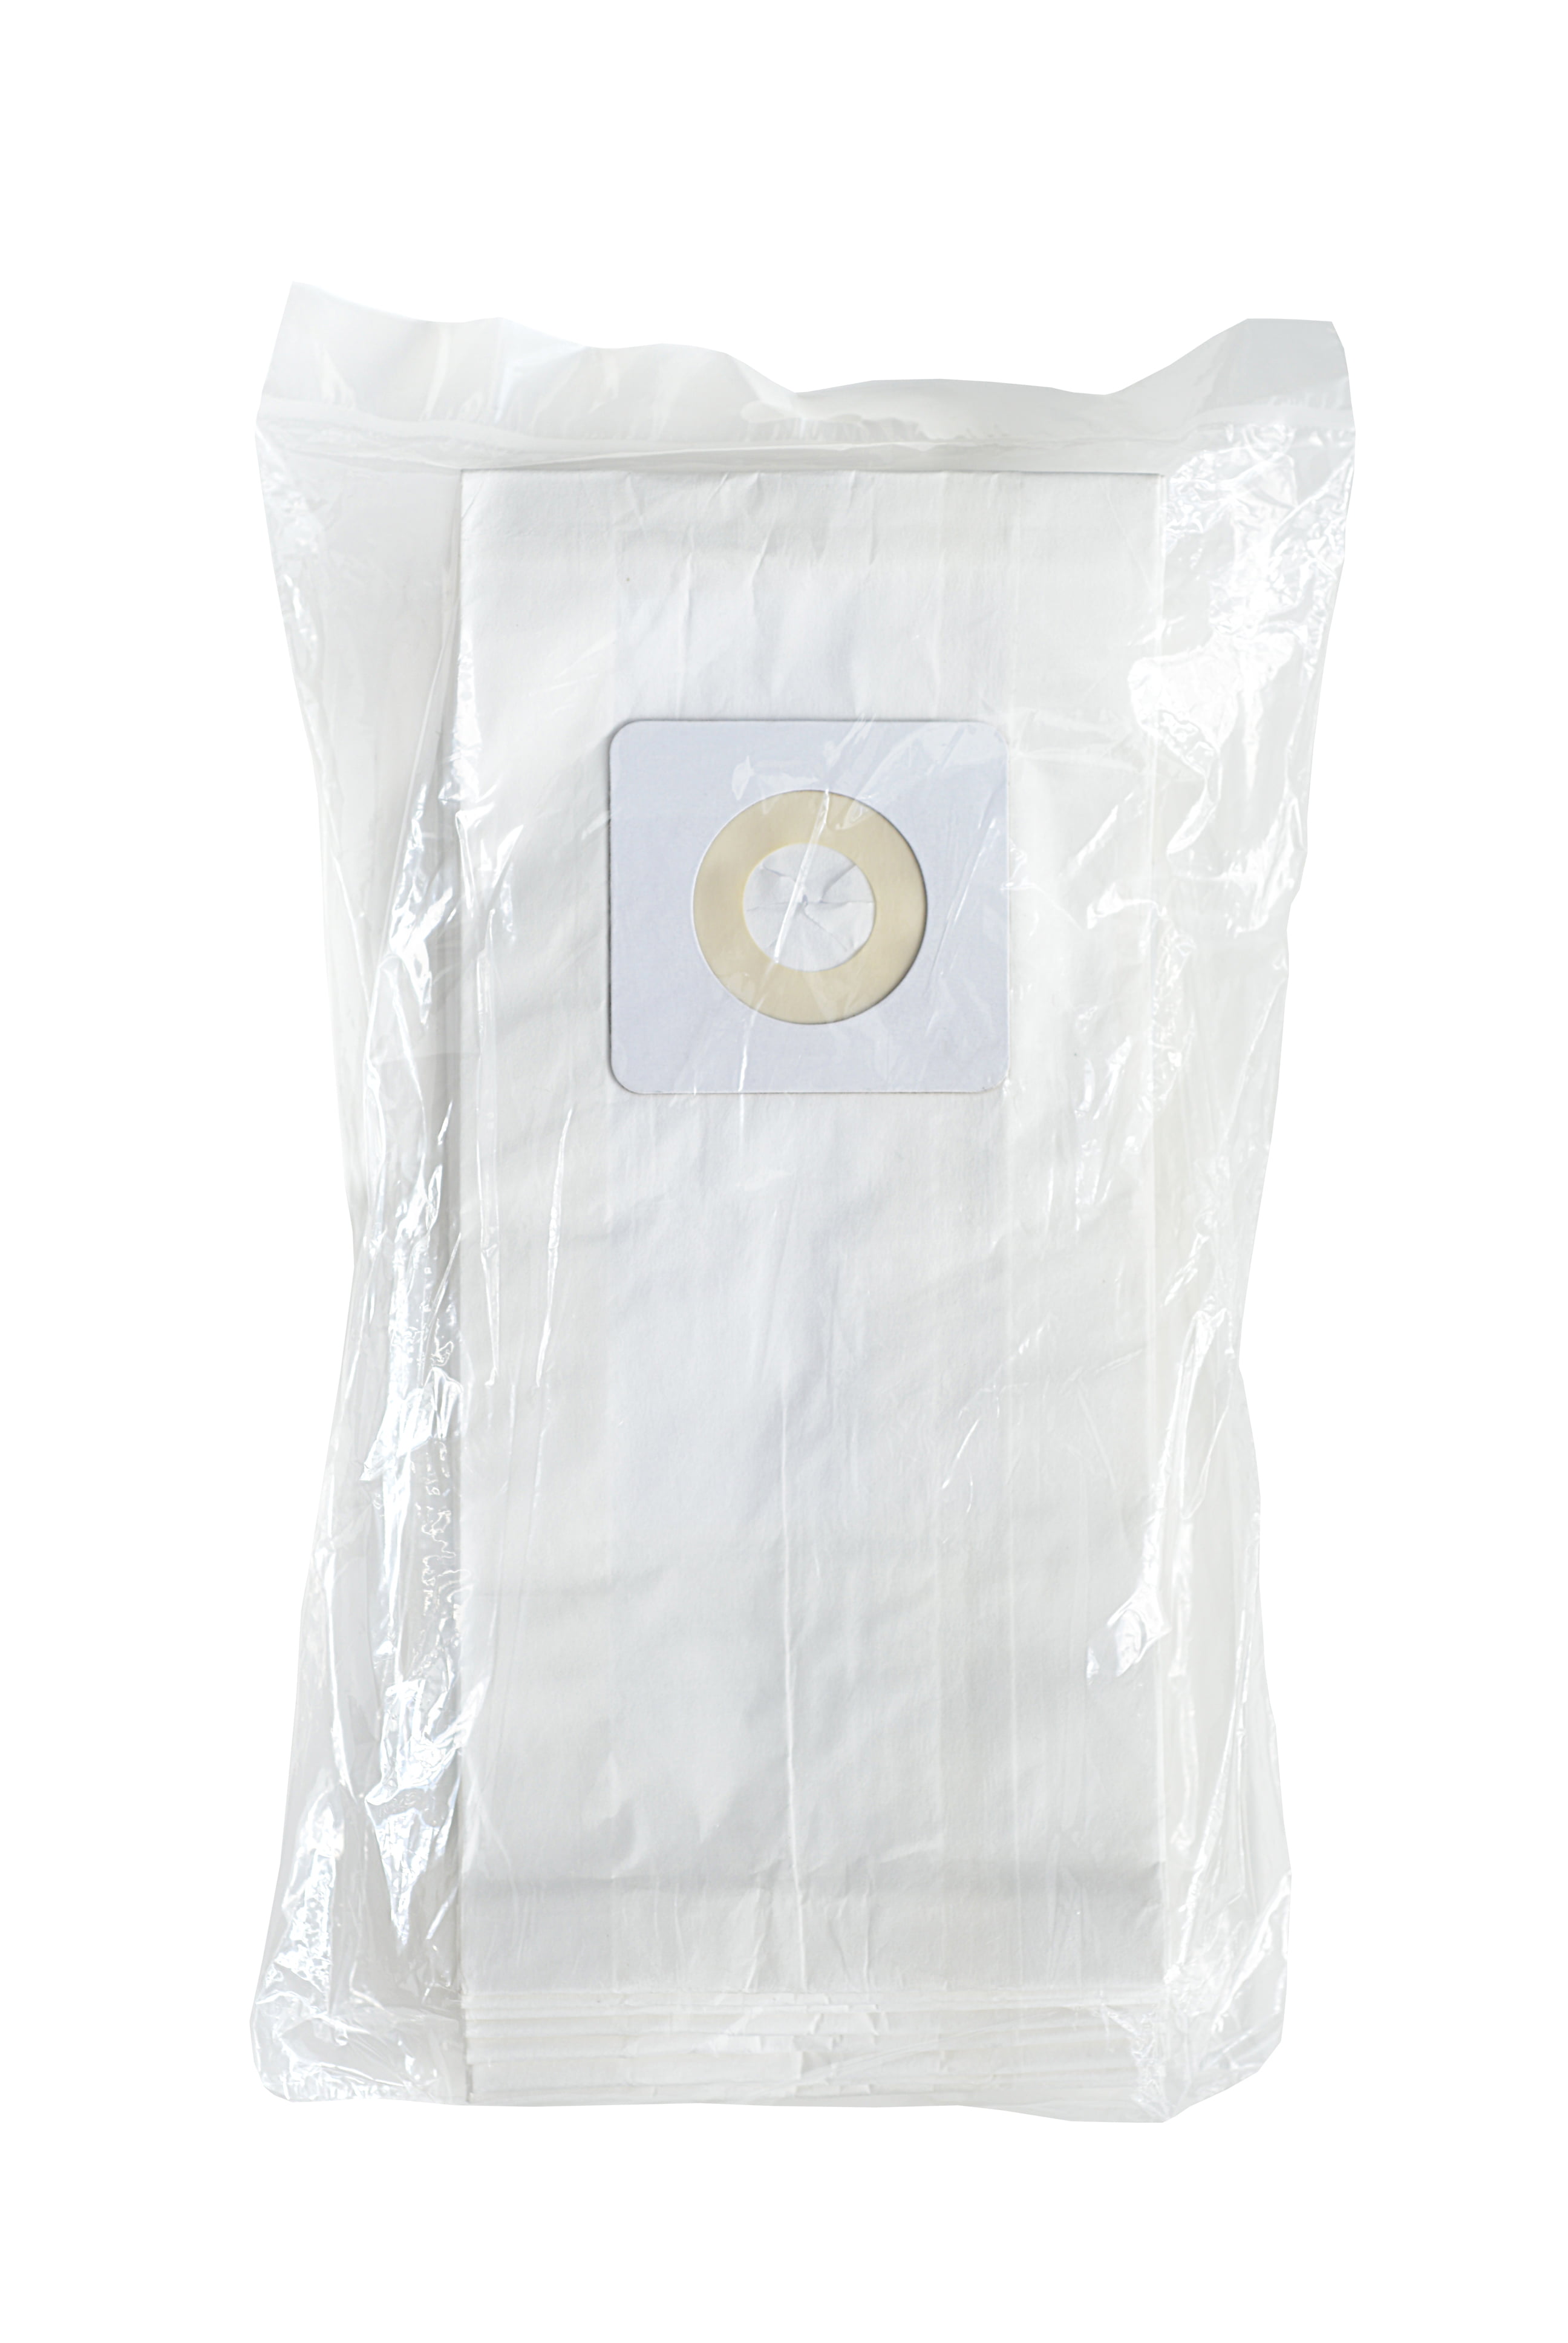 Bissell 4 & 7 - Replacement Vacuum Bags - 10 pack | Walmart Canada